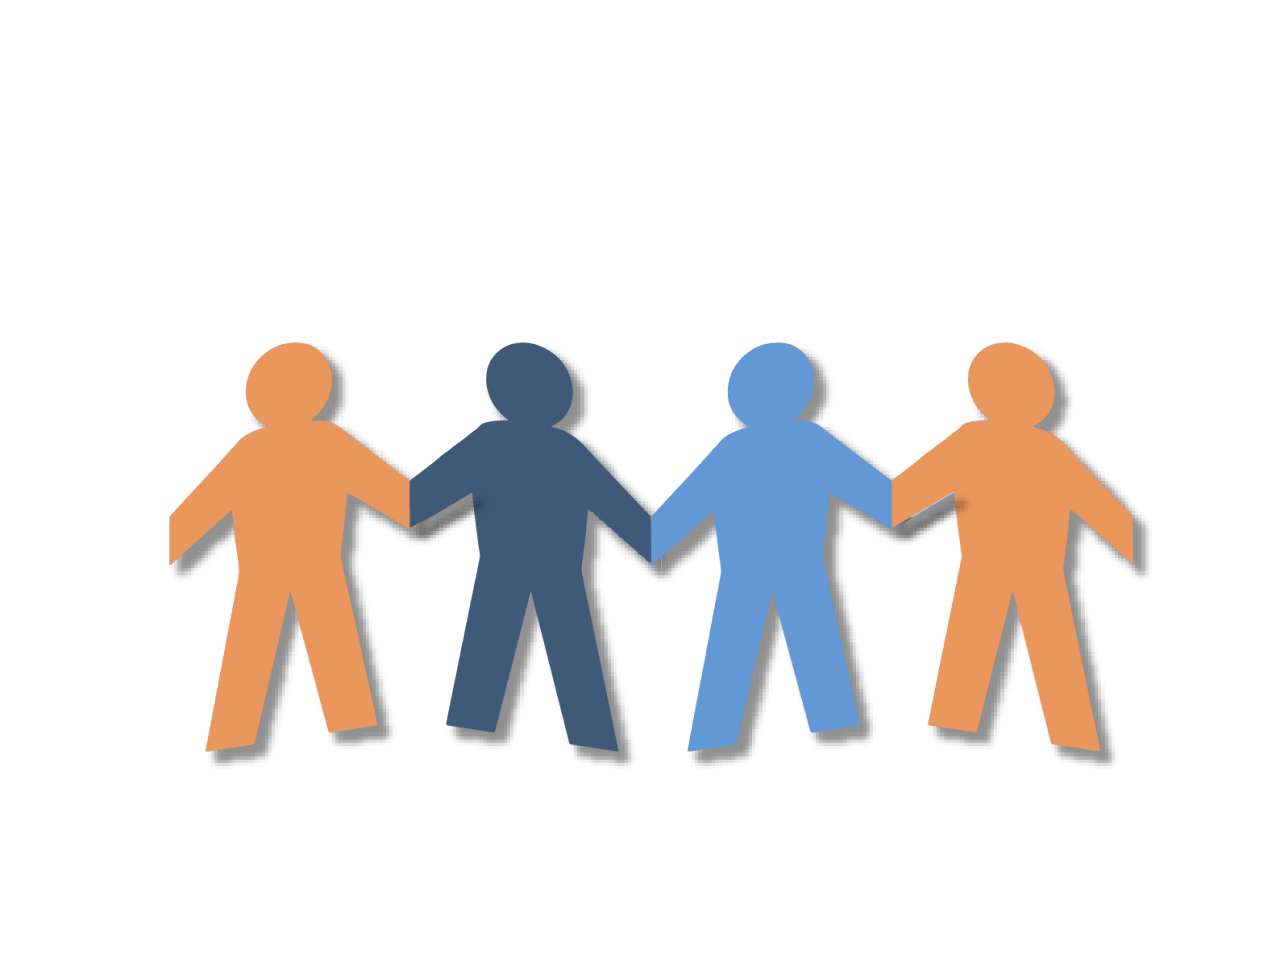 Image shows a string of four figures holding hands all linked in a line representing that our jobs can add value to society and help each other.